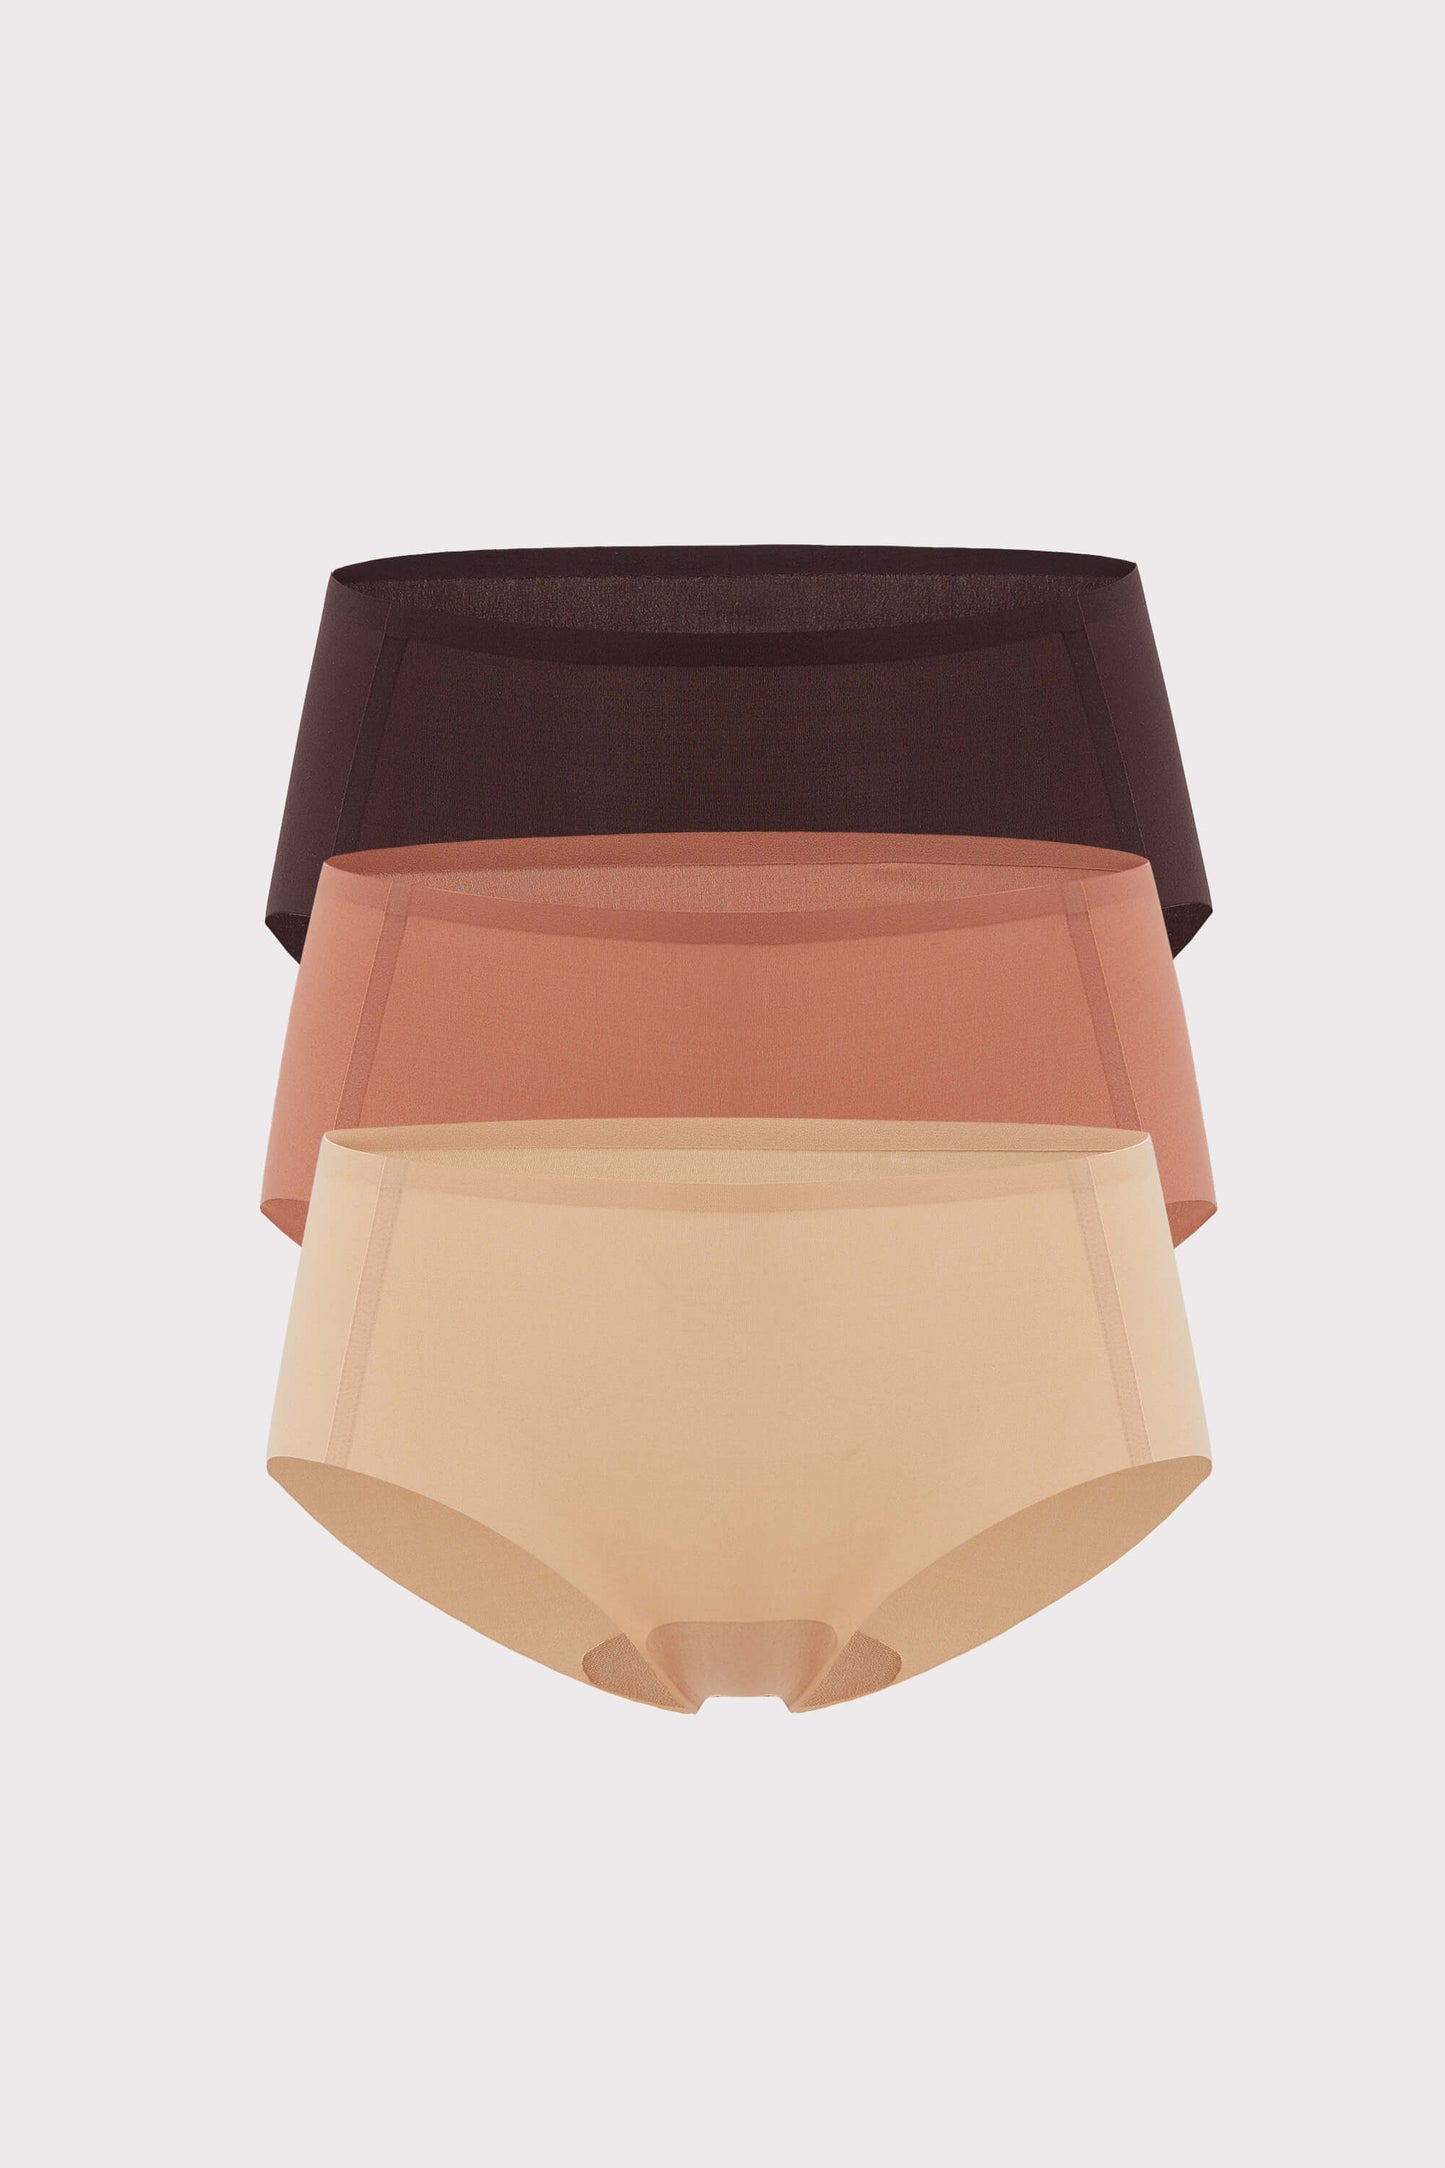 three briefs in brown, rust, and tan